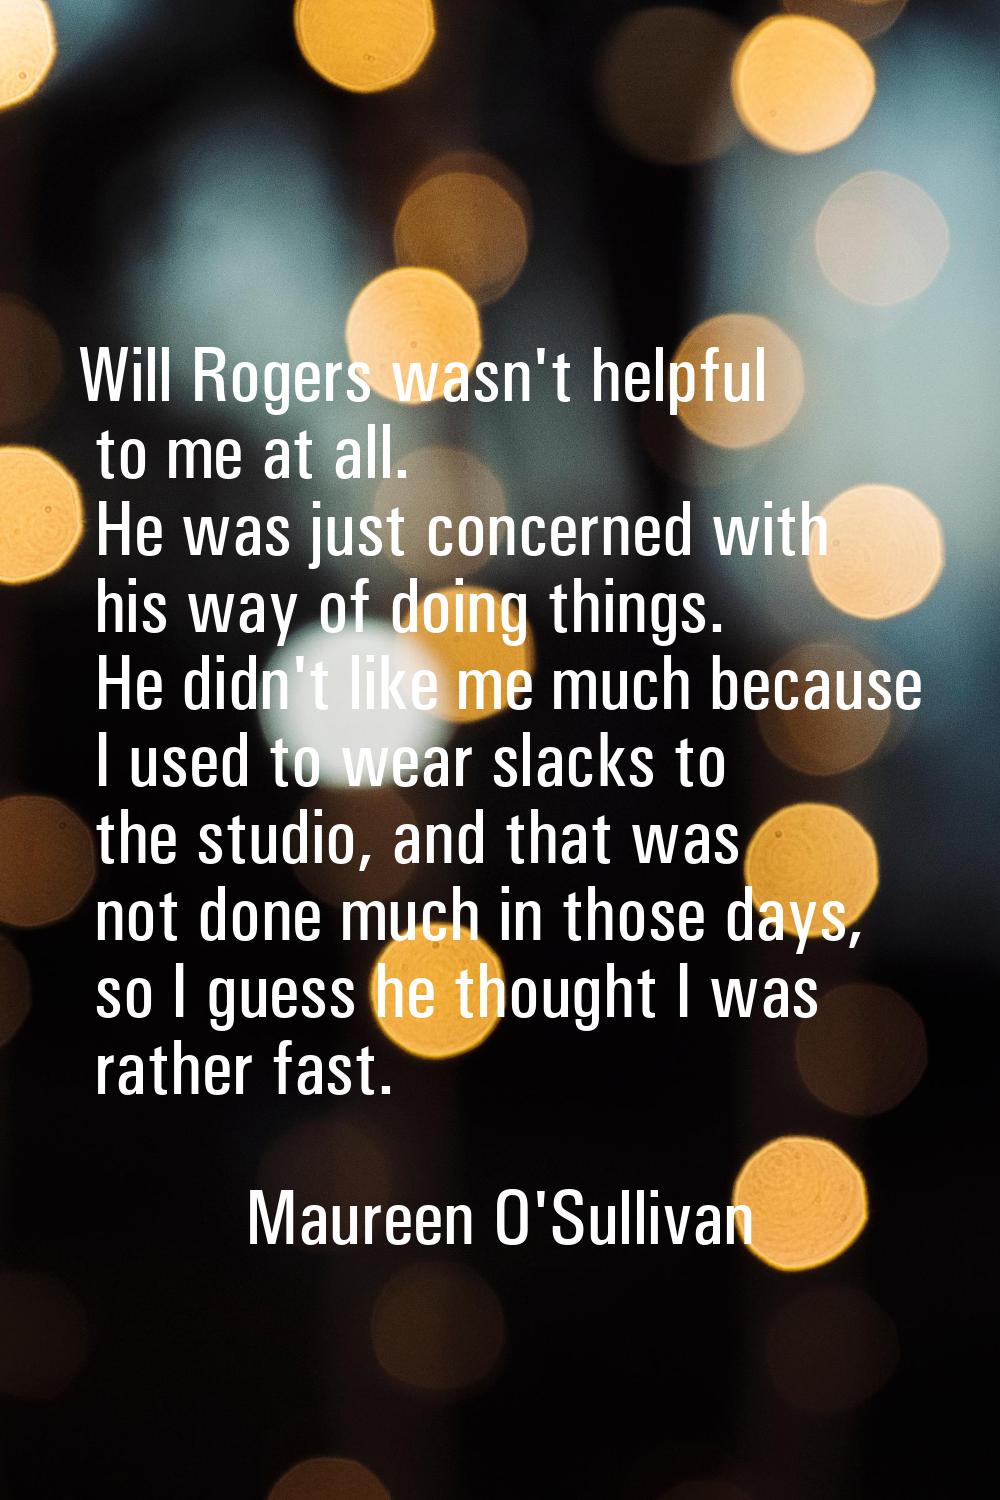 Will Rogers wasn't helpful to me at all. He was just concerned with his way of doing things. He did